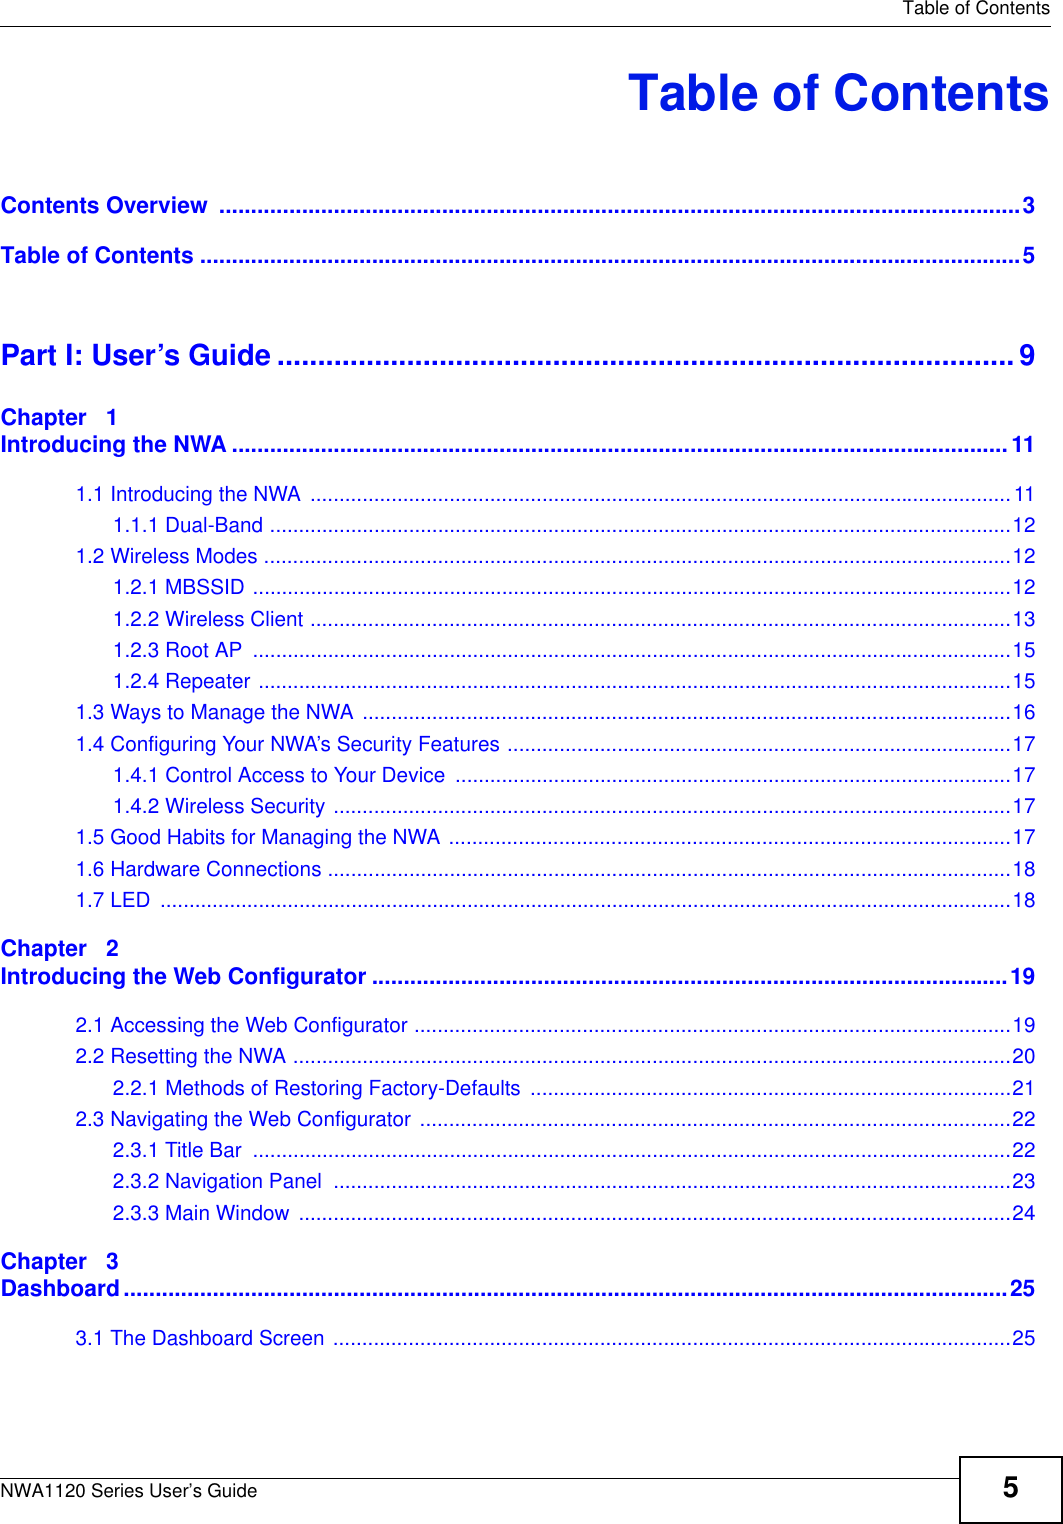   Table of ContentsNWA1120 Series User’s Guide 5Table of ContentsContents Overview  ..............................................................................................................................3Table of Contents .................................................................................................................................5Part I: User’s Guide ........................................................................................... 9Chapter   1Introducing the NWA ..........................................................................................................................111.1 Introducing the NWA .........................................................................................................................111.1.1 Dual-Band ................................................................................................................................121.2 Wireless Modes .................................................................................................................................121.2.1 MBSSID ...................................................................................................................................121.2.2 Wireless Client .........................................................................................................................131.2.3 Root AP  ...................................................................................................................................151.2.4 Repeater ..................................................................................................................................151.3 Ways to Manage the NWA ................................................................................................................161.4 Configuring Your NWA’s Security Features .......................................................................................171.4.1 Control Access to Your Device ................................................................................................171.4.2 Wireless Security .....................................................................................................................171.5 Good Habits for Managing the NWA .................................................................................................171.6 Hardware Connections ......................................................................................................................181.7 LED  ...................................................................................................................................................18Chapter   2Introducing the Web Configurator ....................................................................................................192.1 Accessing the Web Configurator .......................................................................................................192.2 Resetting the NWA ............................................................................................................................202.2.1 Methods of Restoring Factory-Defaults ...................................................................................212.3 Navigating the Web Configurator ......................................................................................................222.3.1 Title Bar  ...................................................................................................................................222.3.2 Navigation Panel  .....................................................................................................................232.3.3 Main Window  ...........................................................................................................................24Chapter   3Dashboard...........................................................................................................................................253.1 The Dashboard Screen .....................................................................................................................25